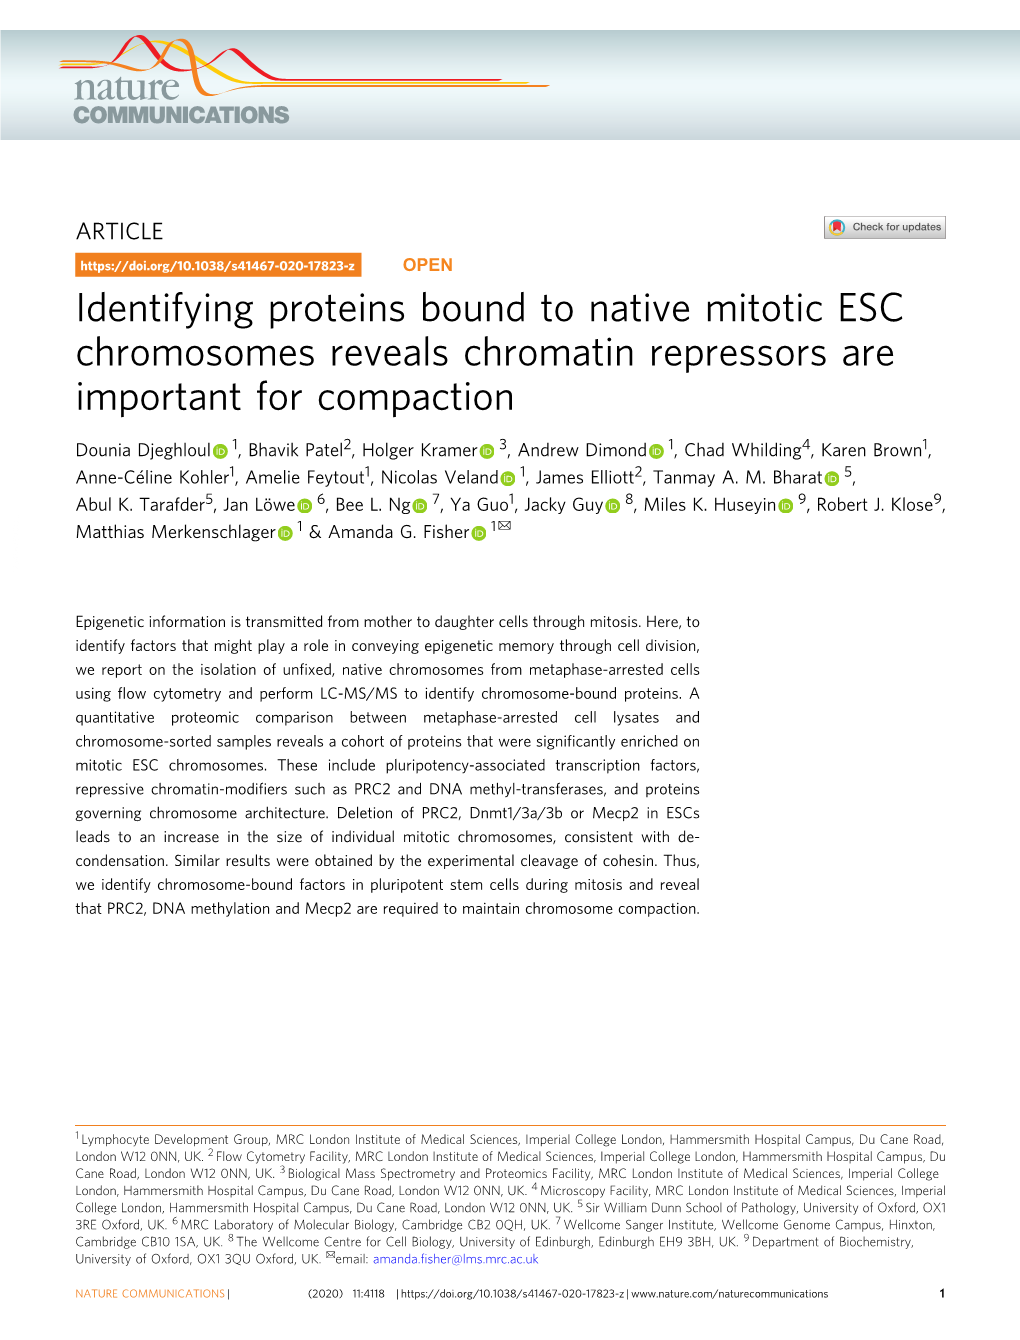 Identifying Proteins Bound to Native Mitotic ESC Chromosomes Reveals Chromatin Repressors Are Important for Compaction